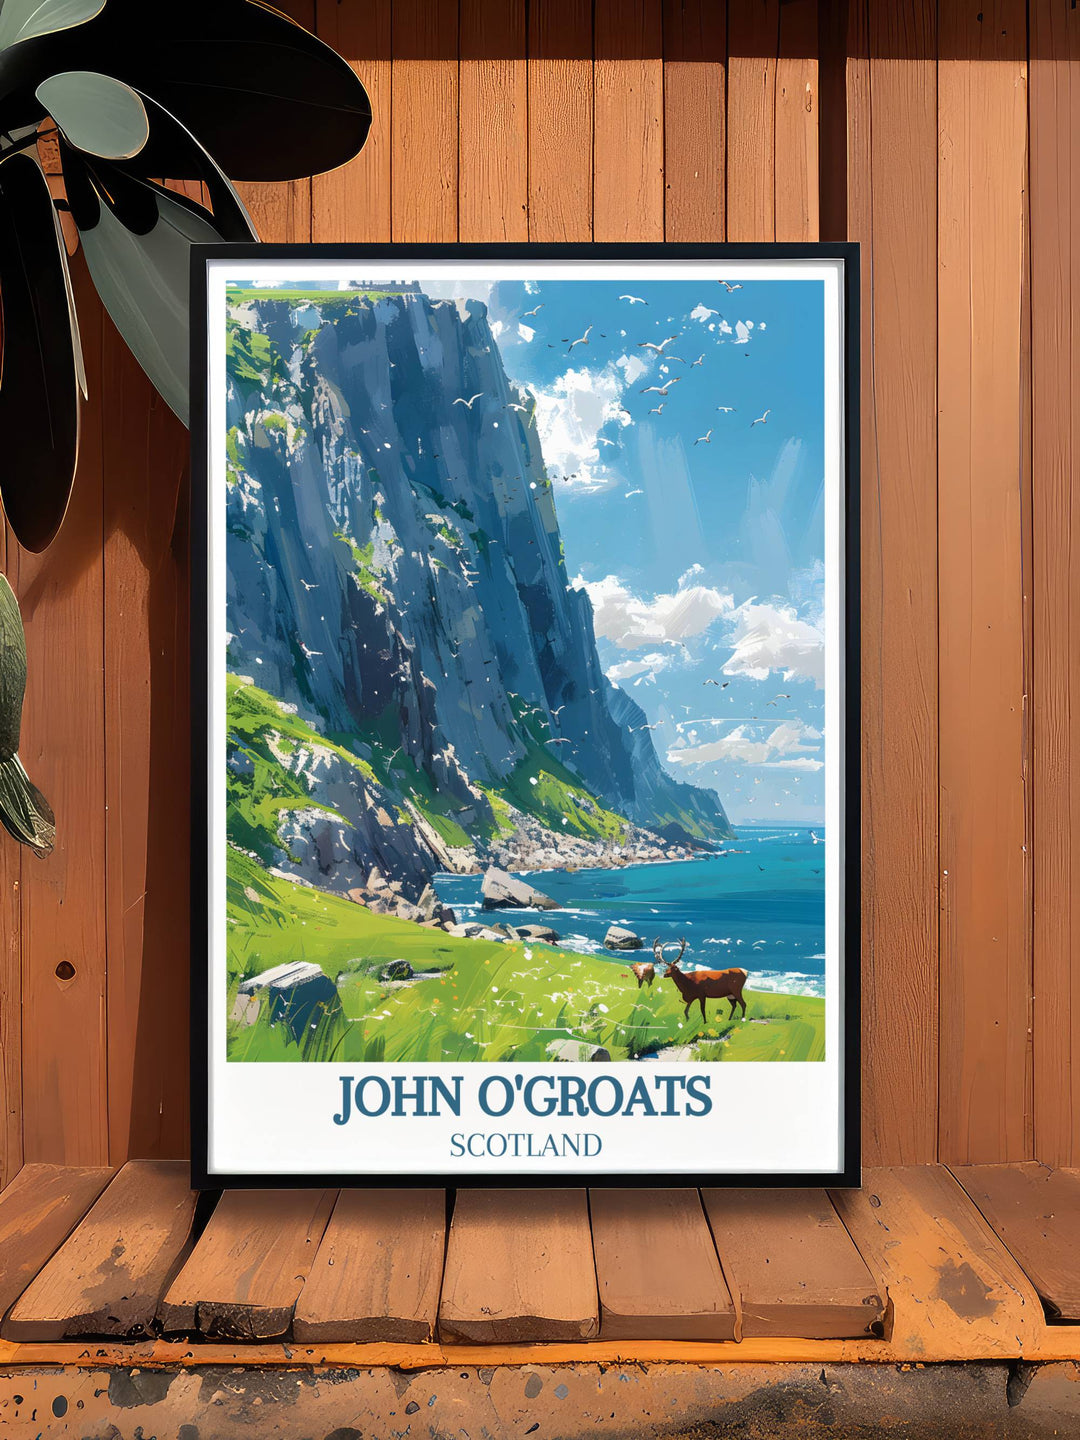 Scottish Highlands Signpost wall art featuring the picturesque scenery of the Highlands. Perfect for commemorating cycling journeys and appreciating the serene landscapes of Scotland. An inspiring piece for nature lovers.